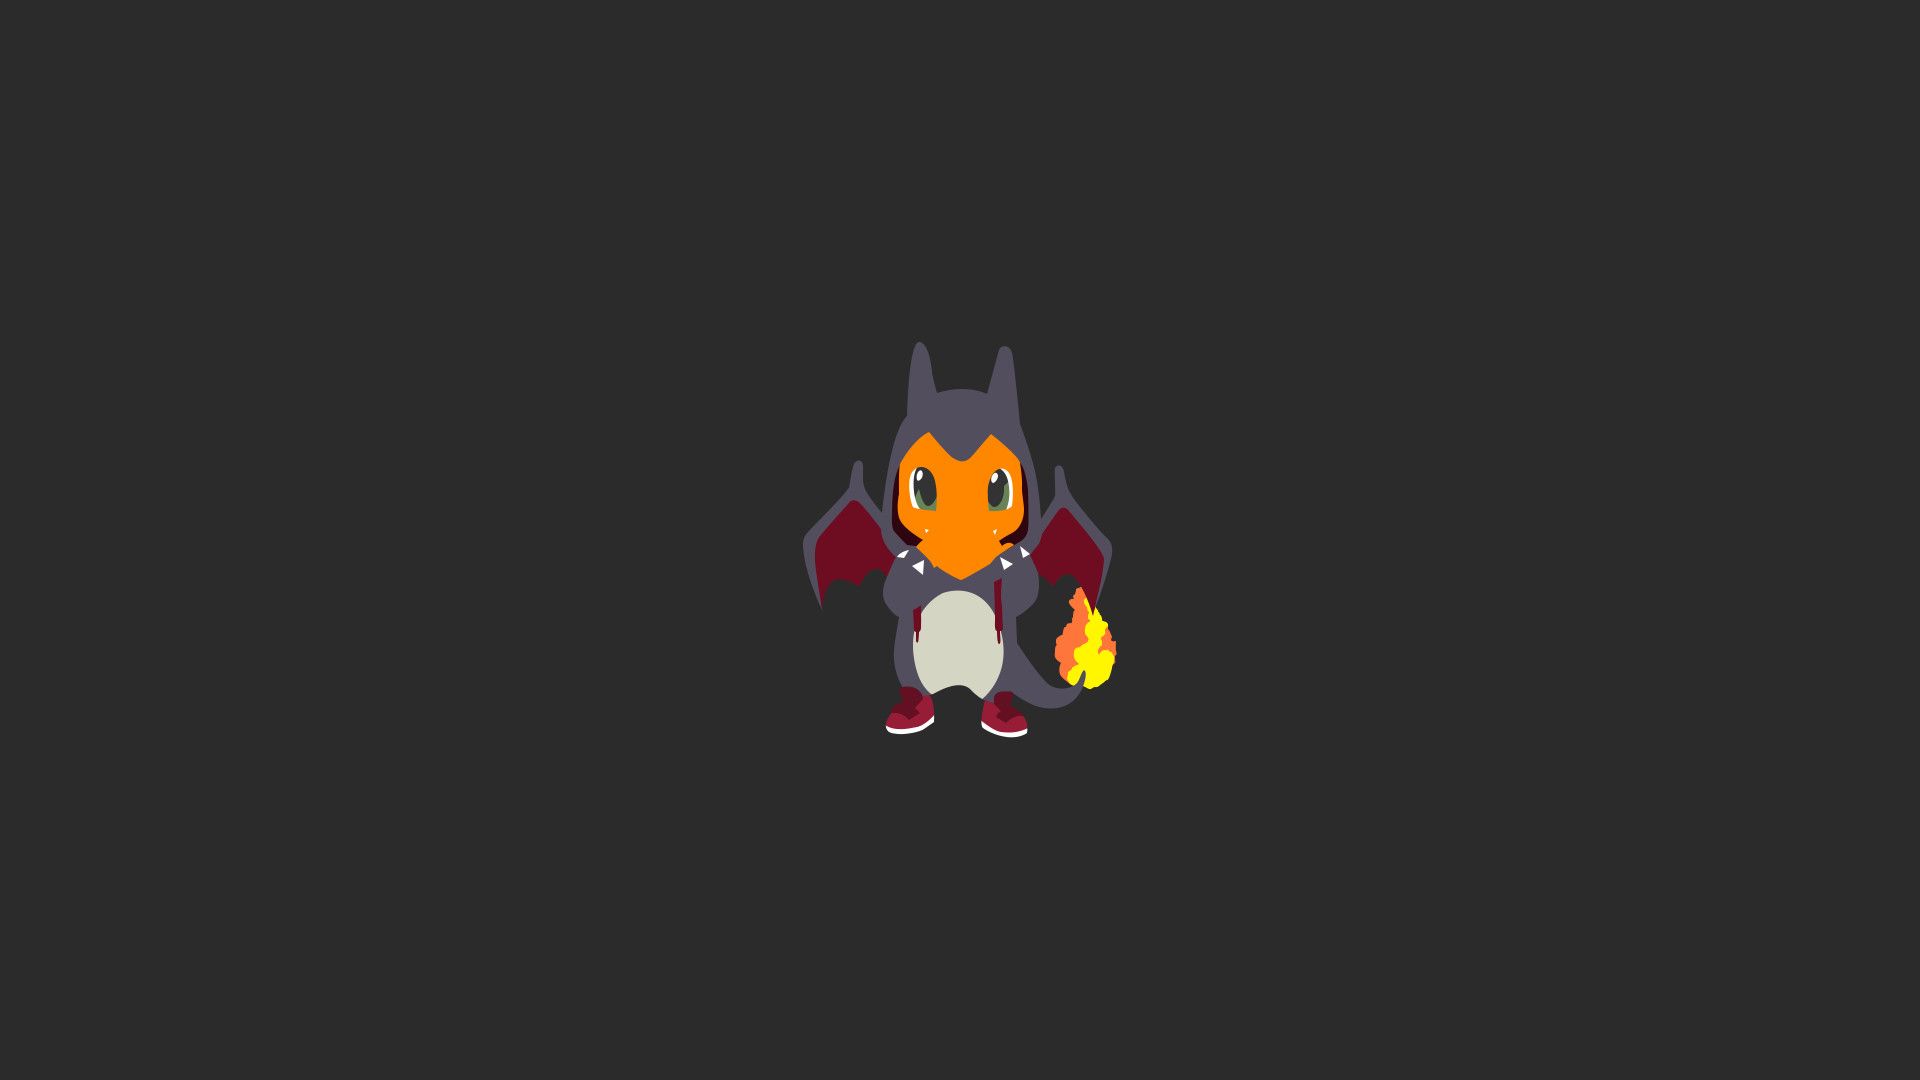 Shiny Charizard wallpaper wallpaper Collections